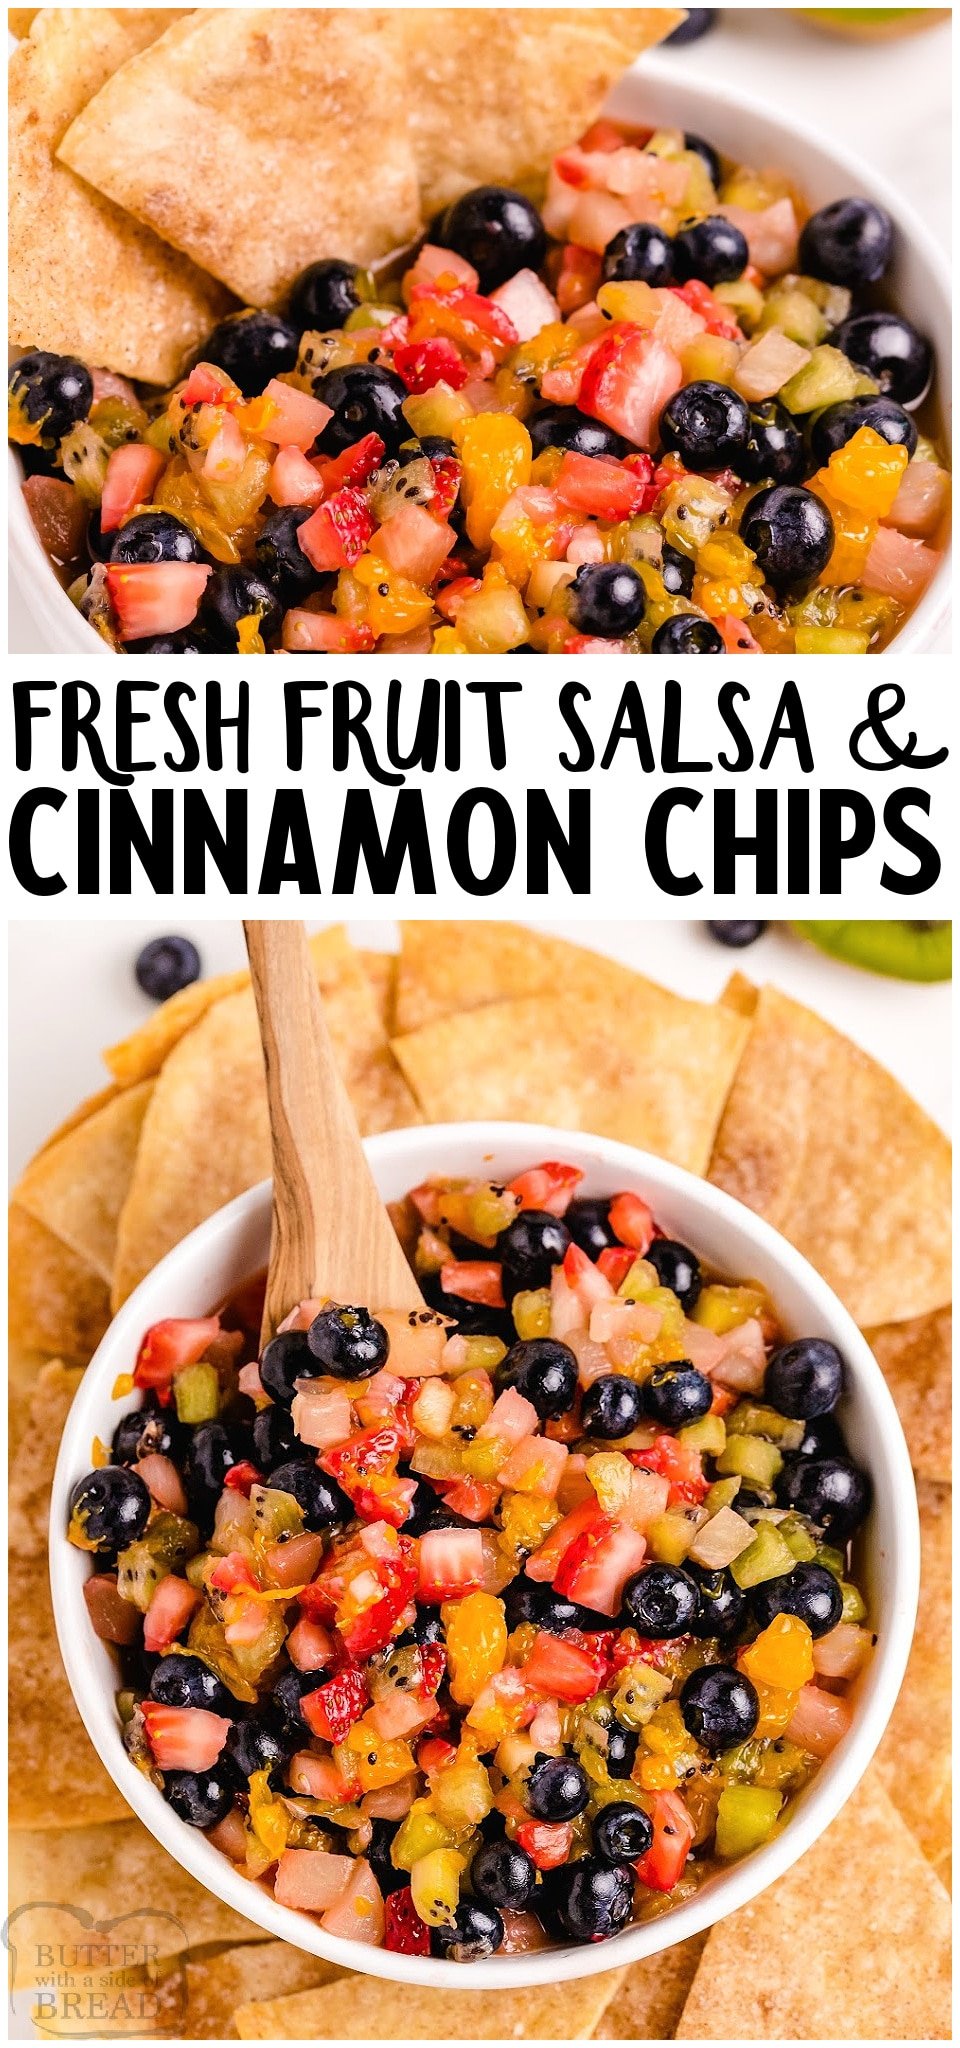 Fresh Fruit Salsa with buttery baked cinnamon chips for a fun & tasty snack or treat! Easy fruit salsa recipe that everyone raves about. It's perfect for any gathering! #fruit #salsa #baked #appetizer #easyrecipe from BUTTER WITH A SIDE OF BREAD